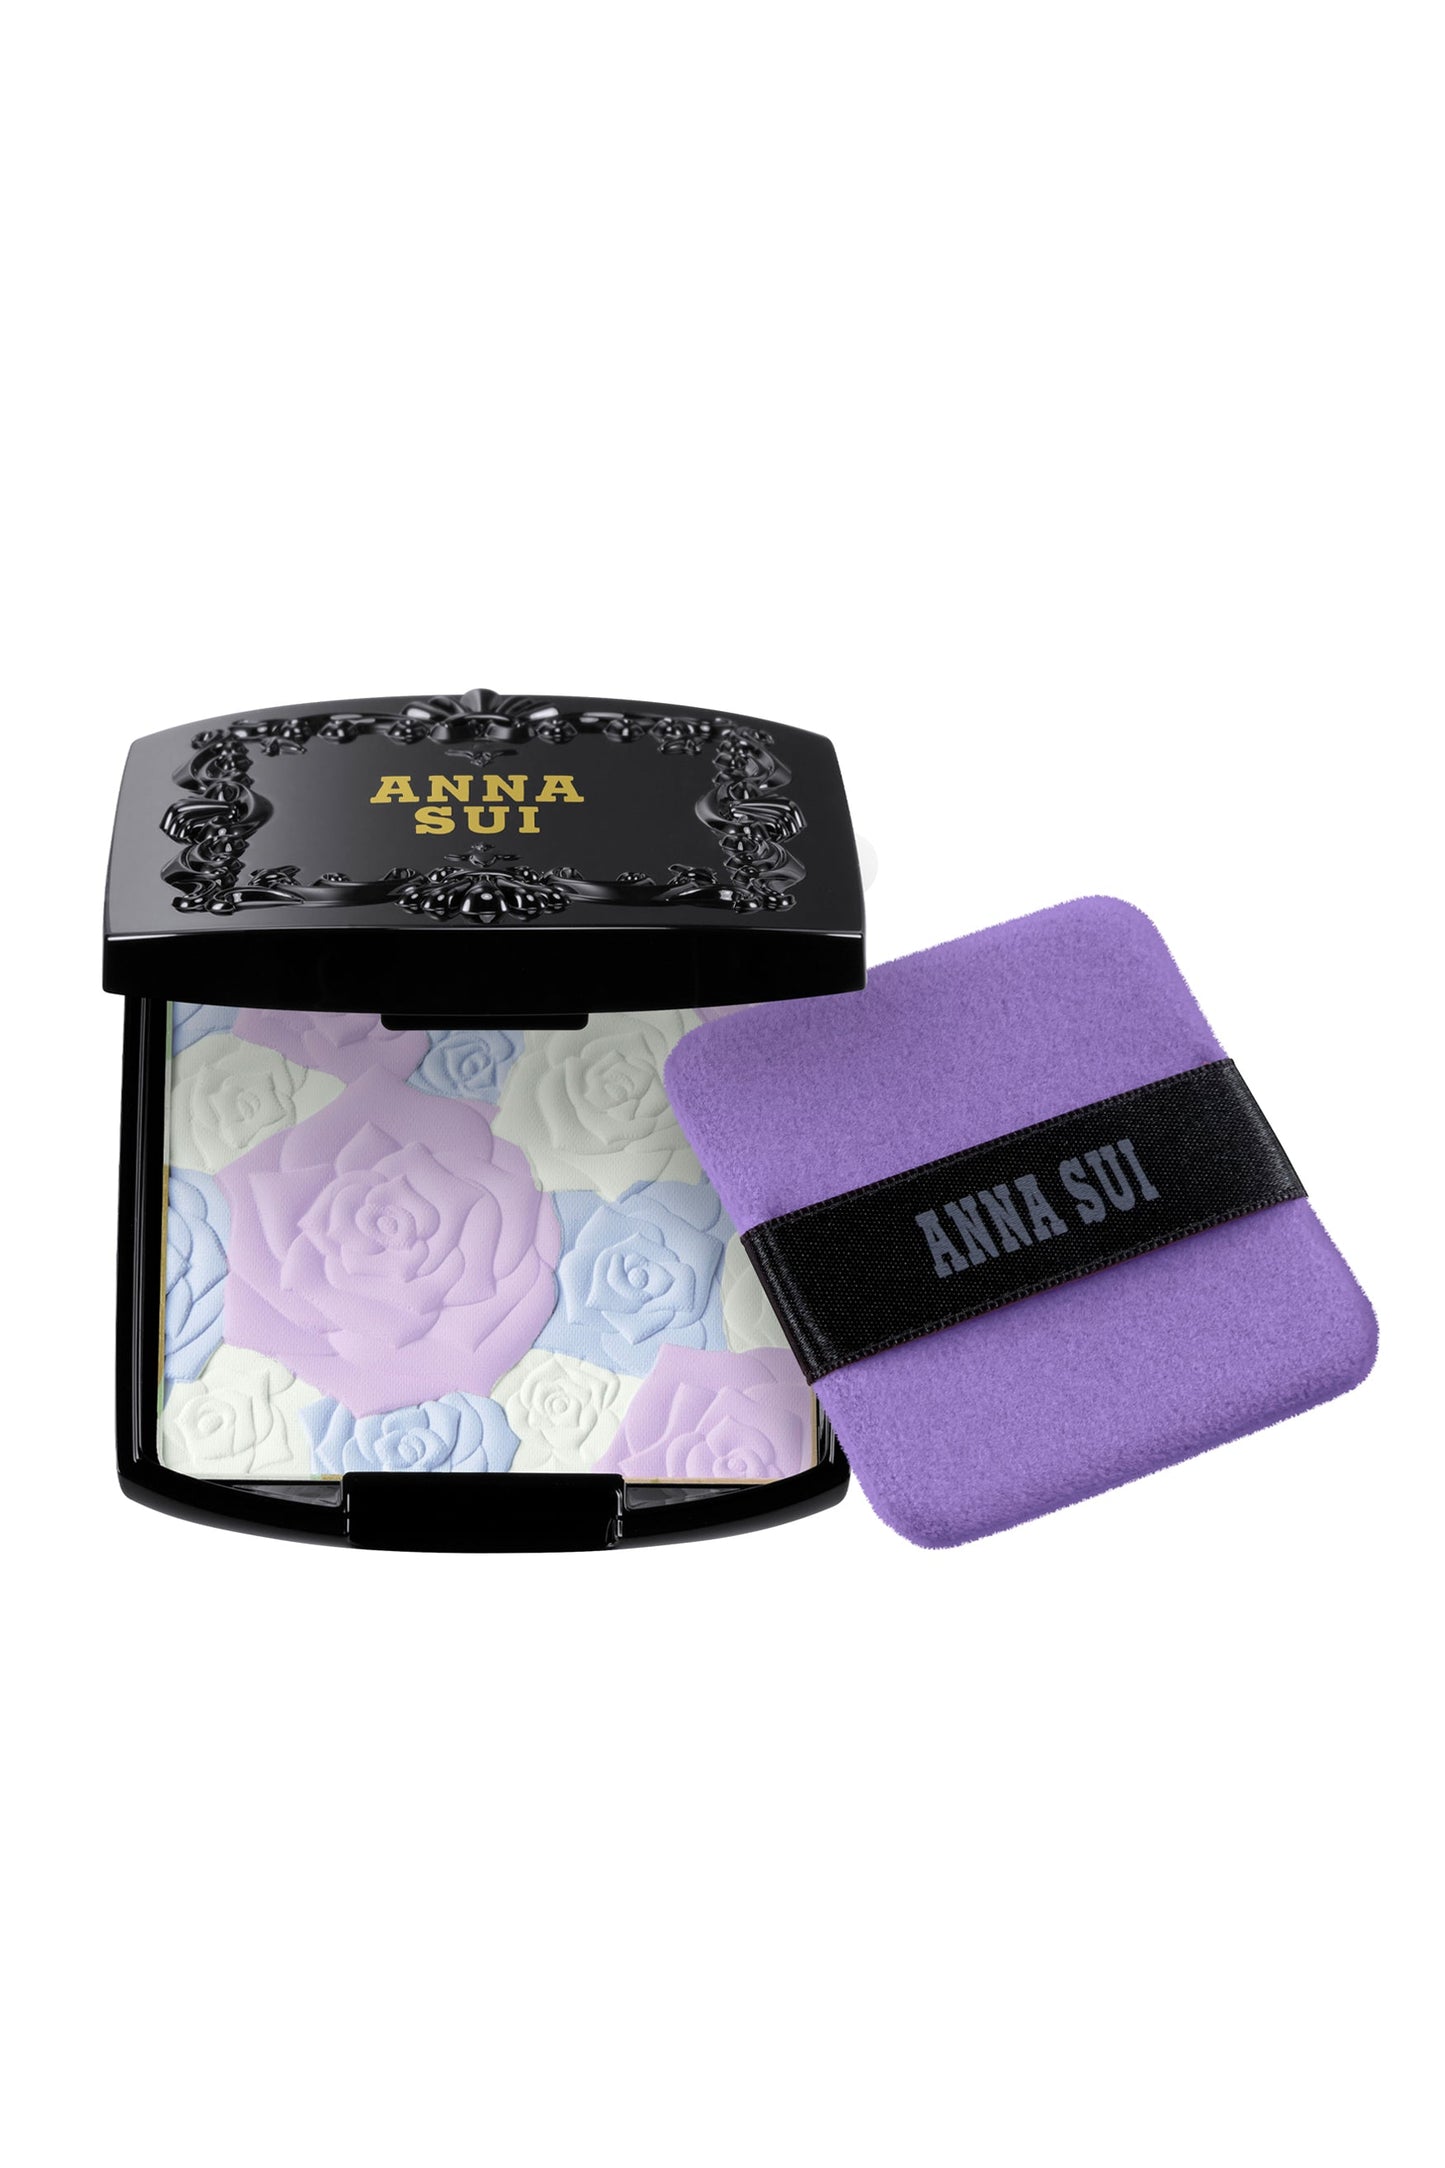 Anna Sui Rose Pressed colored Powder black box with floral design and gold AS label, purple pad